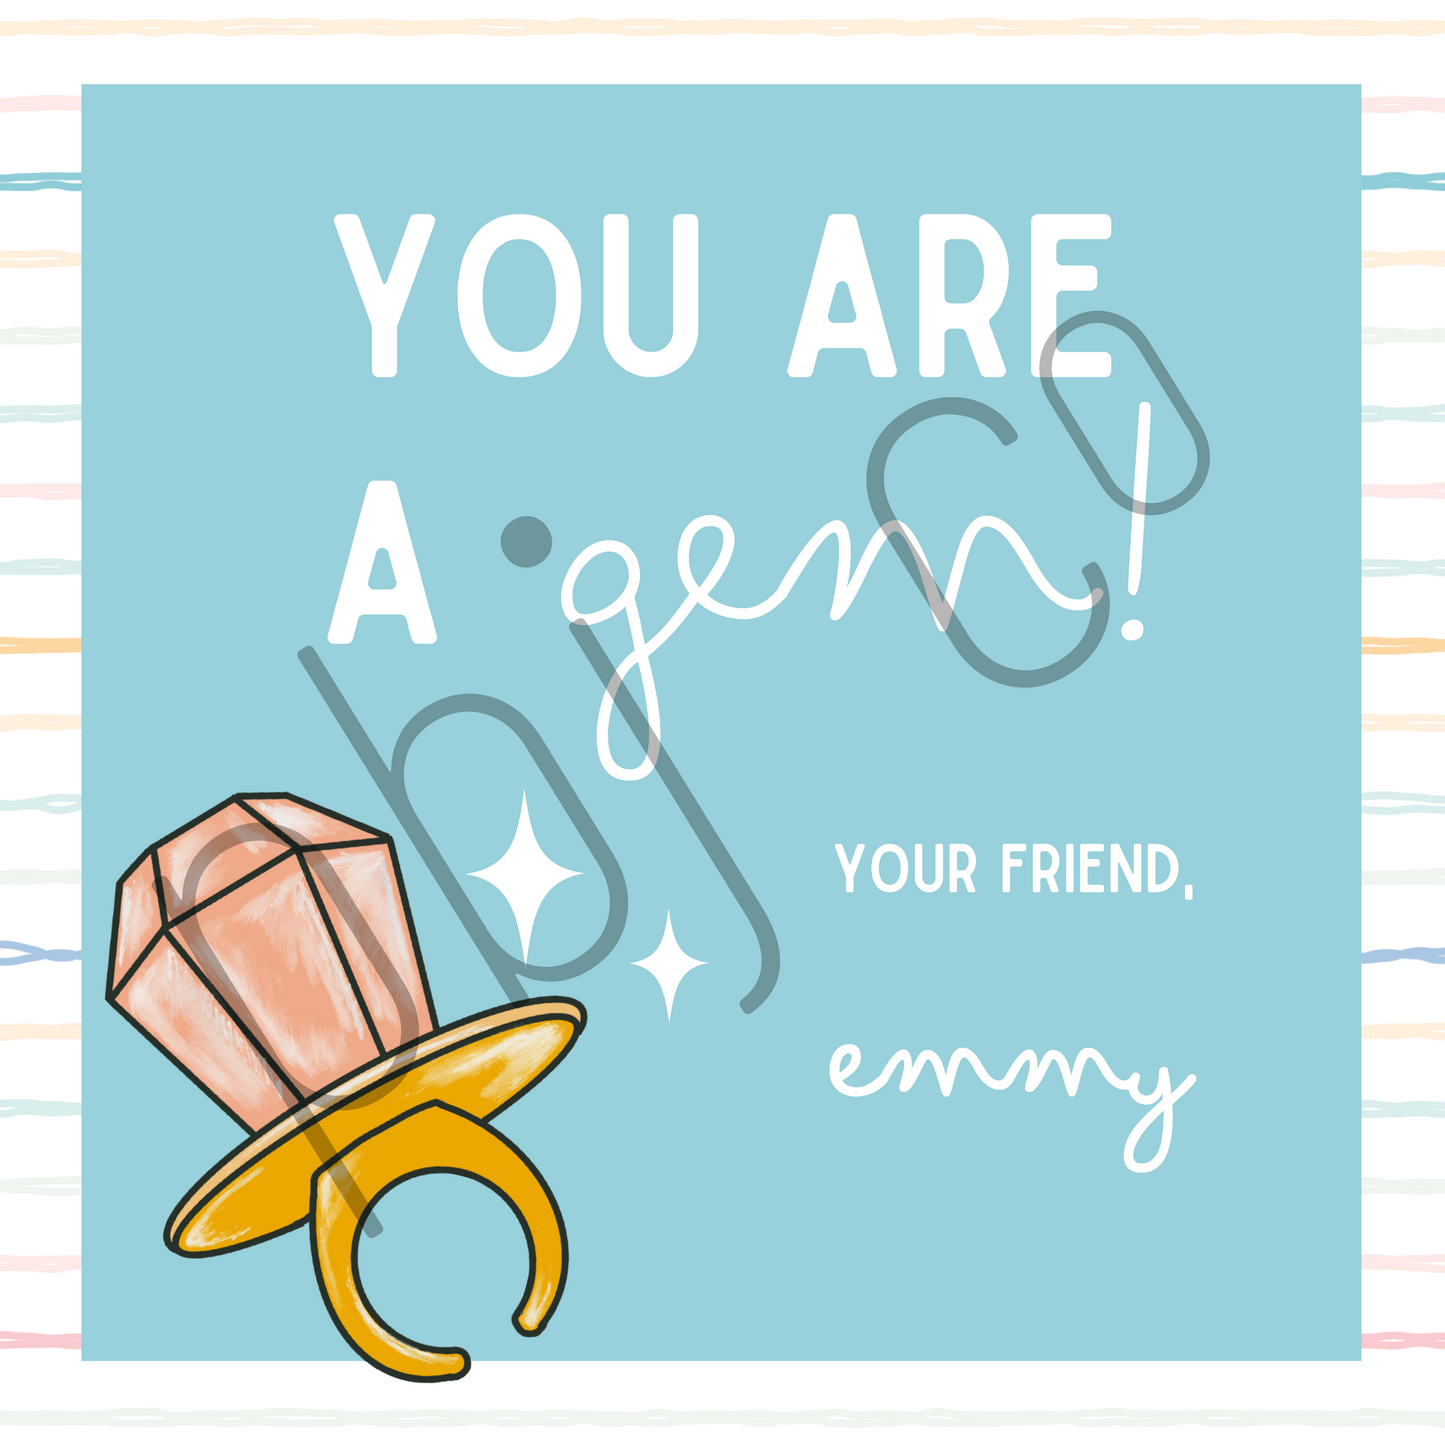 EDITABLE Kids Customized You Are A Gem Valentine's Day Cards Favors Boy Girl Valentines Gift Tag Classroom Daycare Teacher